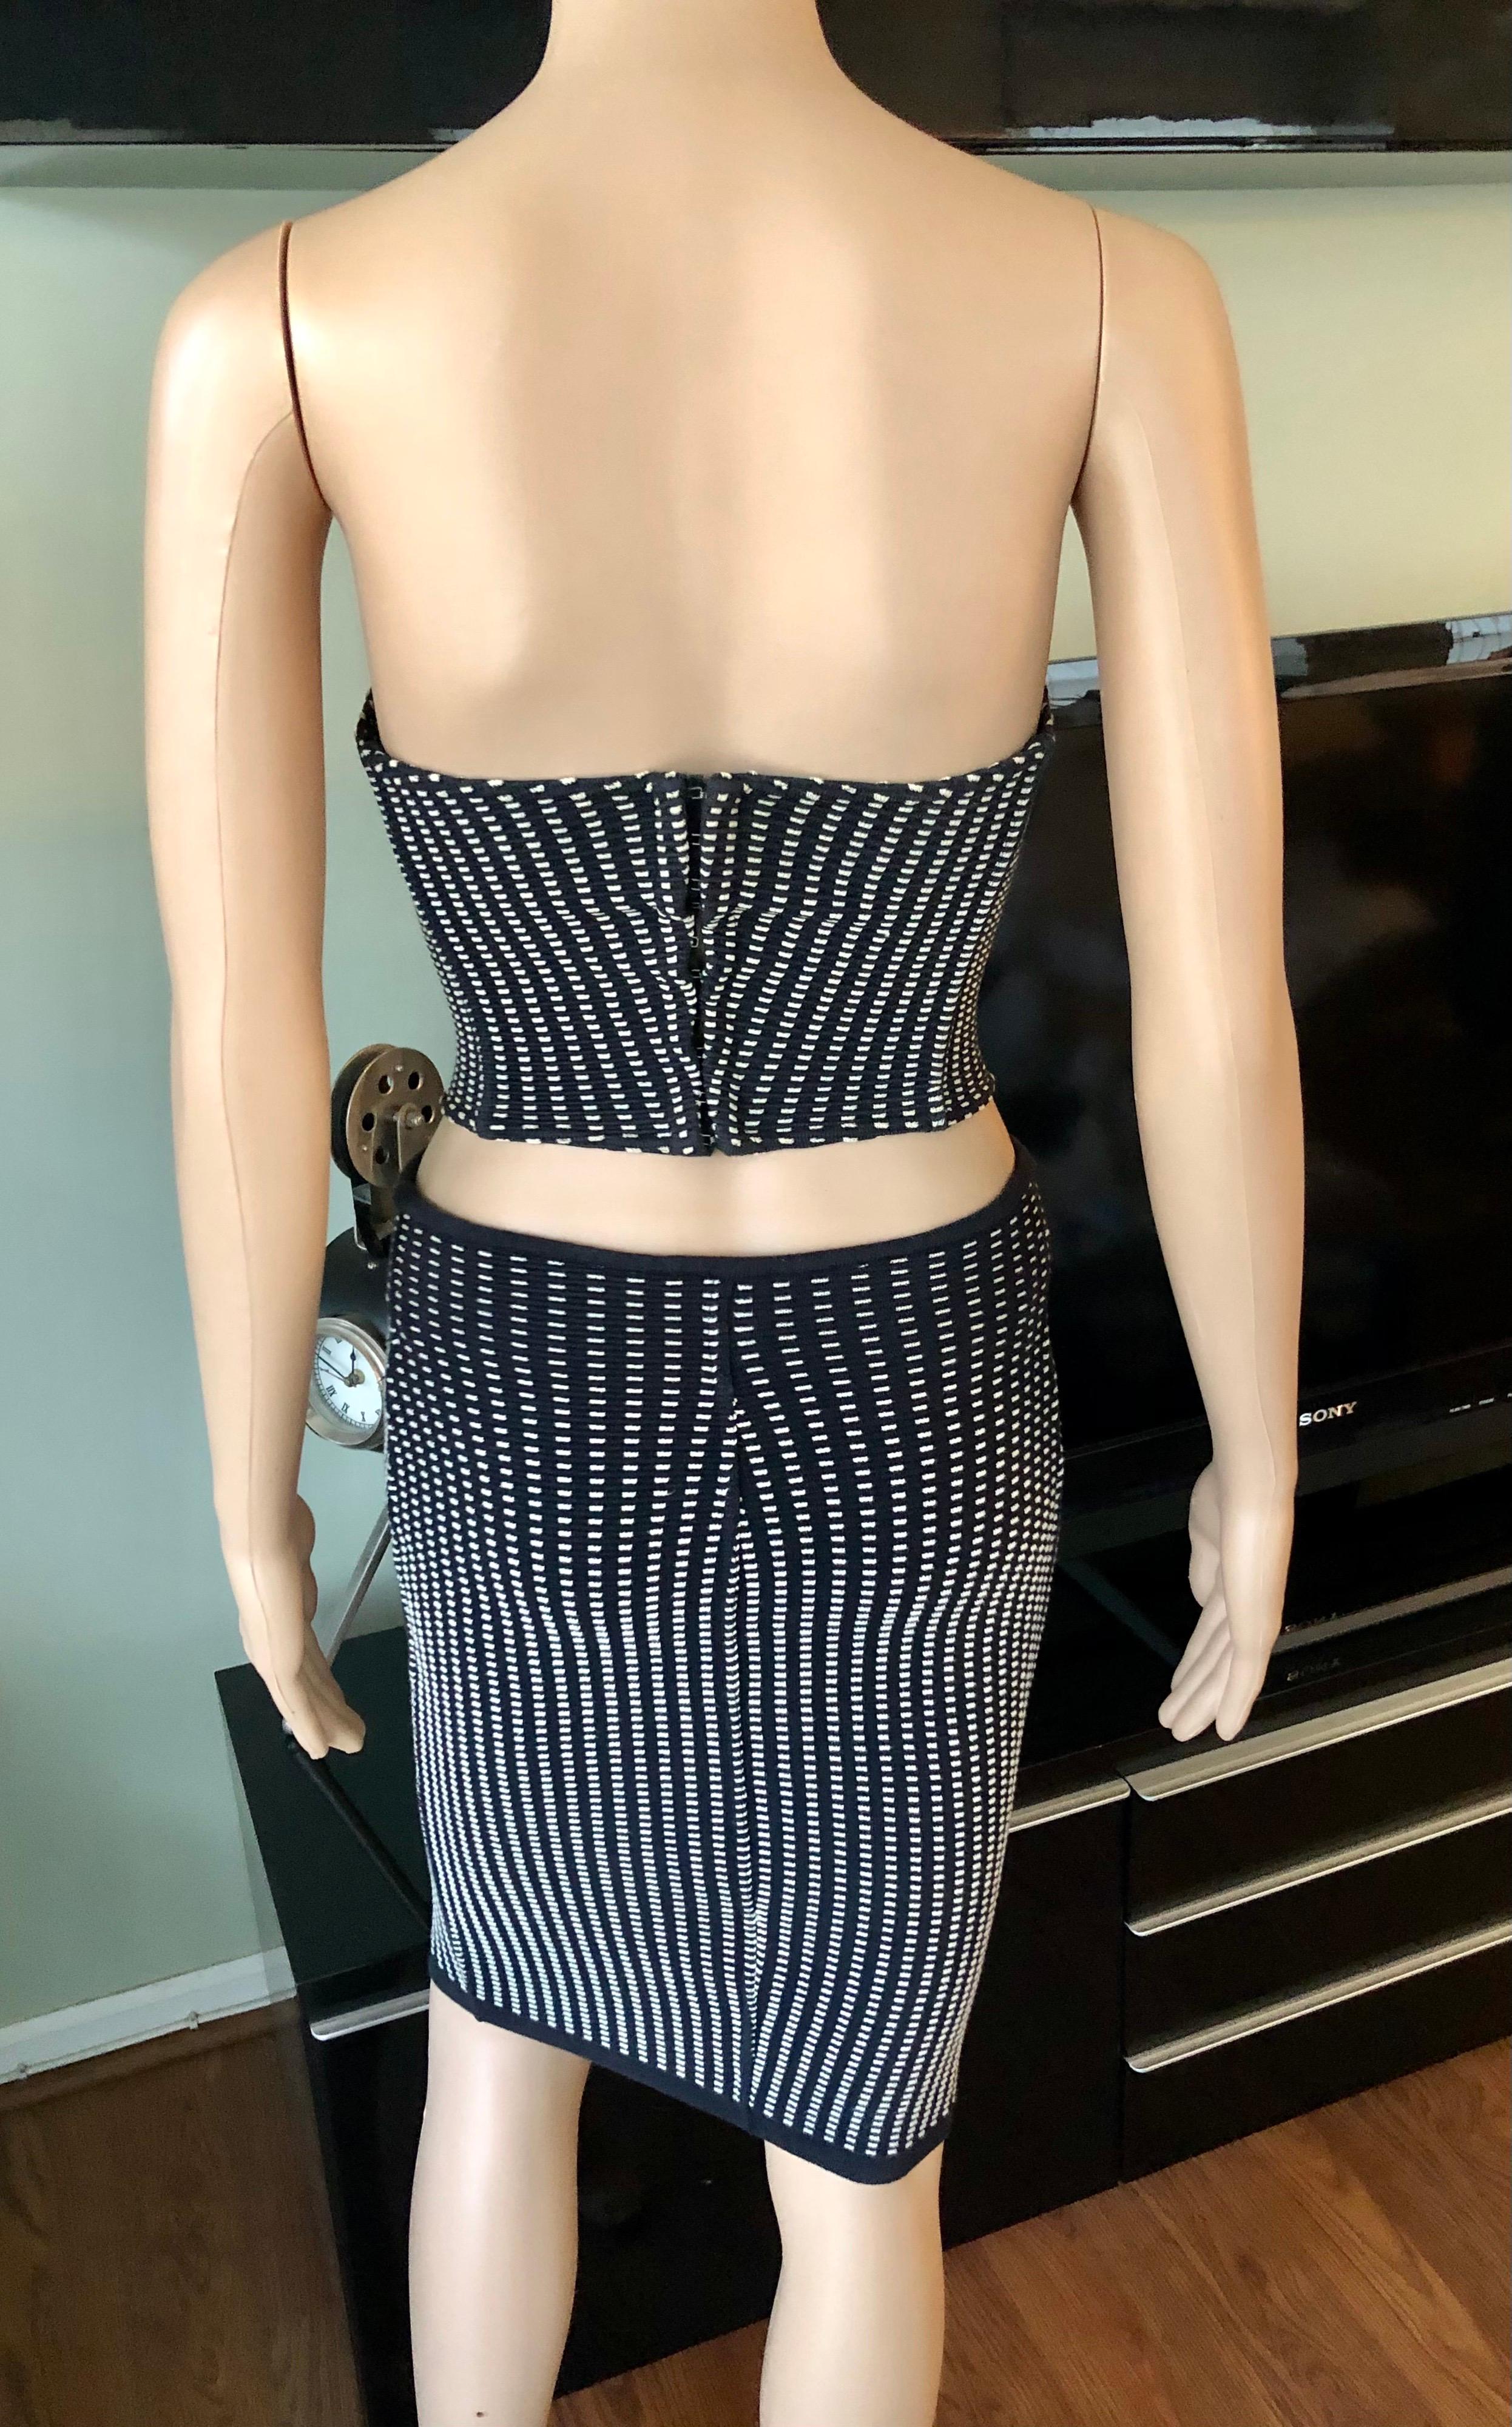 Azzedine Alaia S/S 1991 Vintage Skirt and Bustier Crop Top 2 Piece Set  1